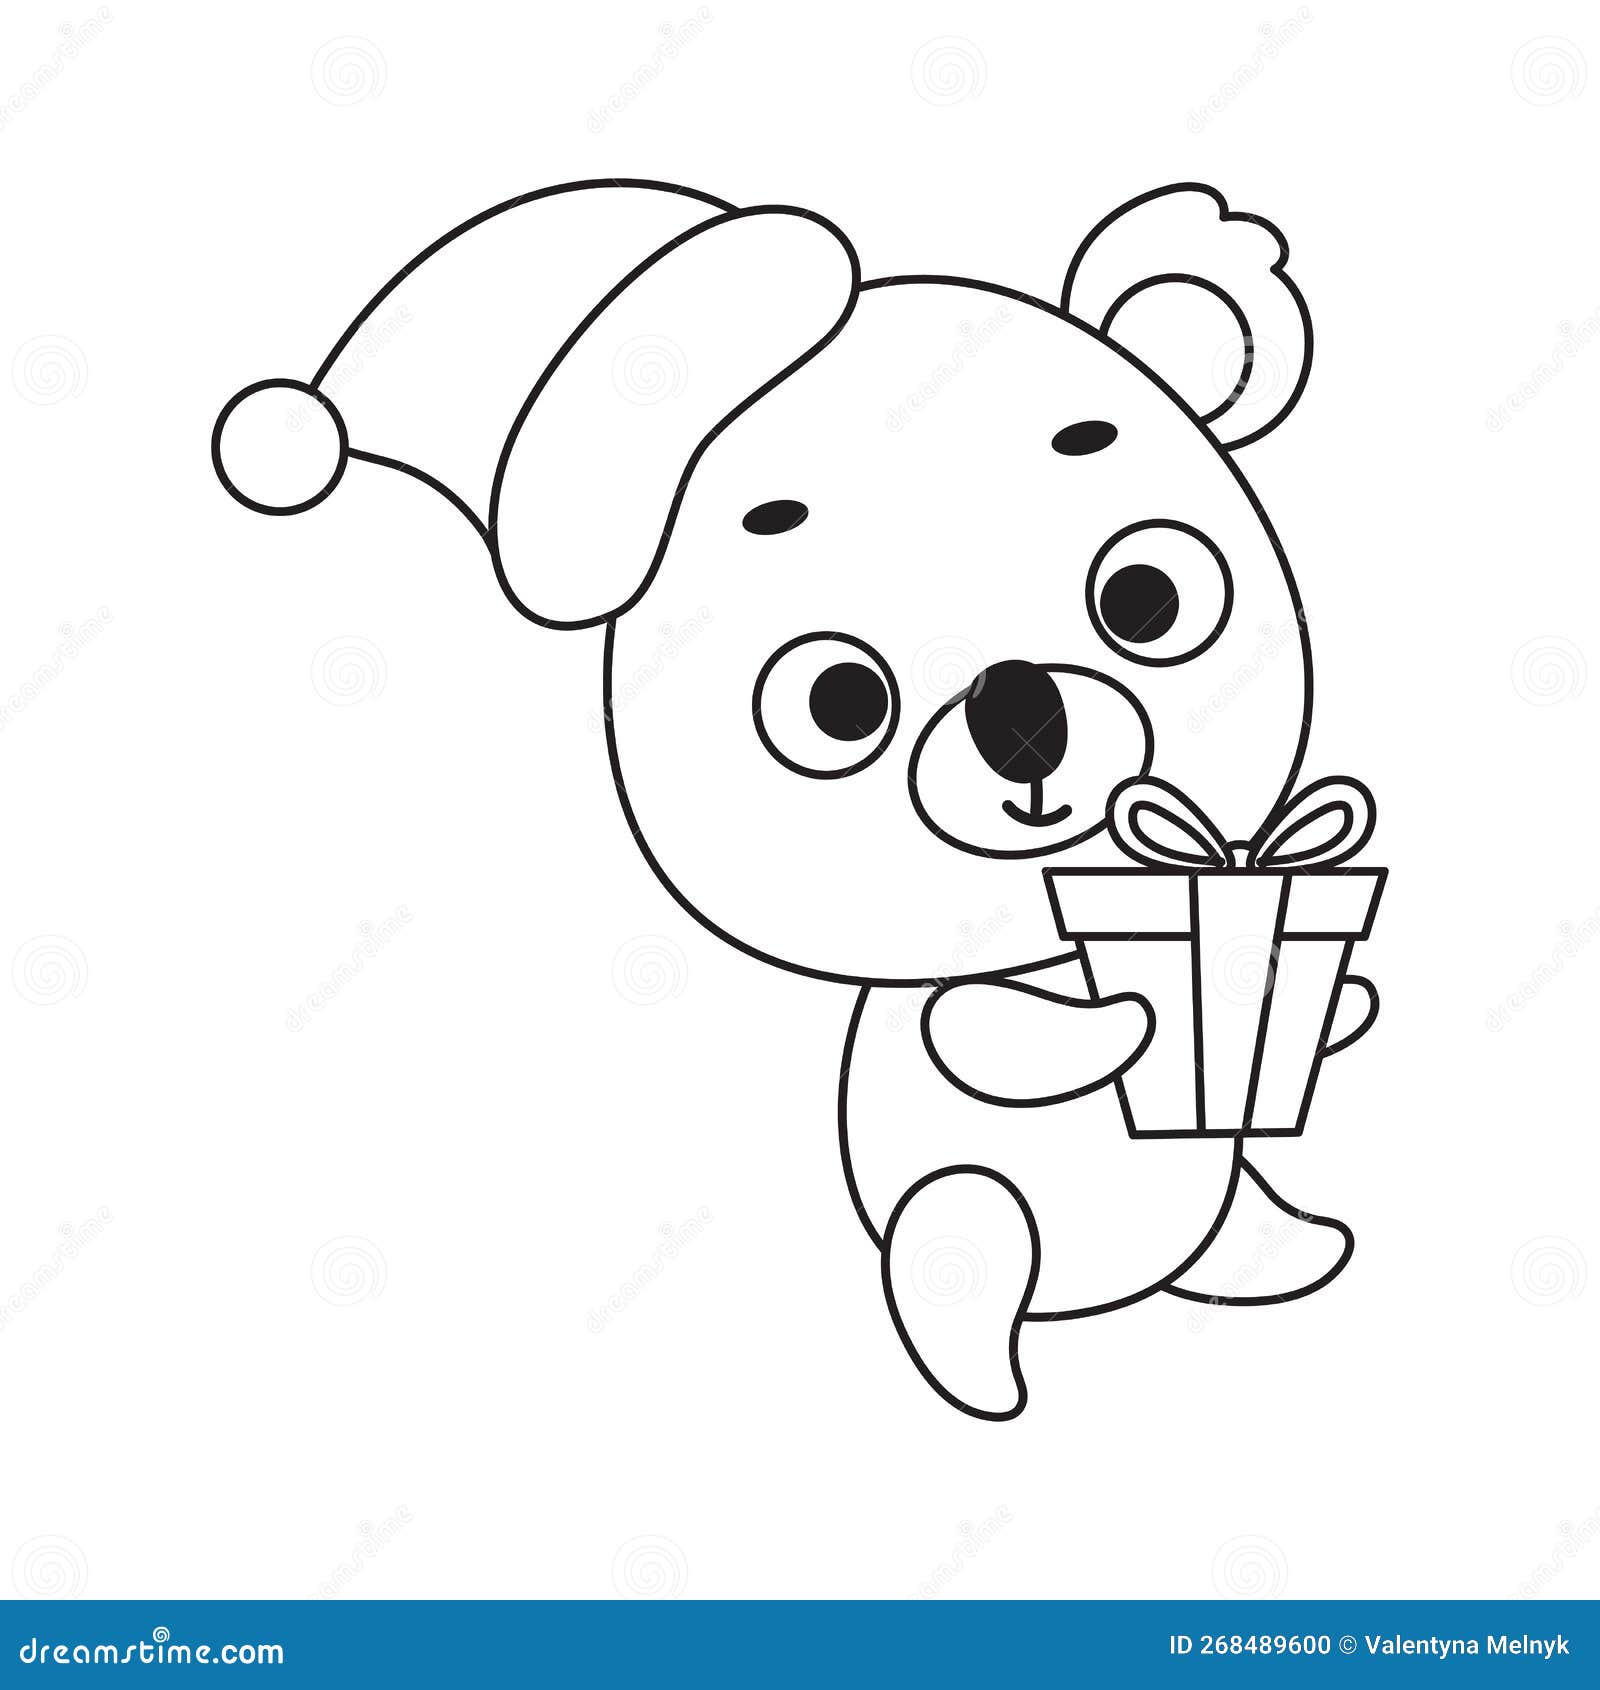 Coloring Page Cute Little Koala Carries Gift Box. Coloring Book for ...